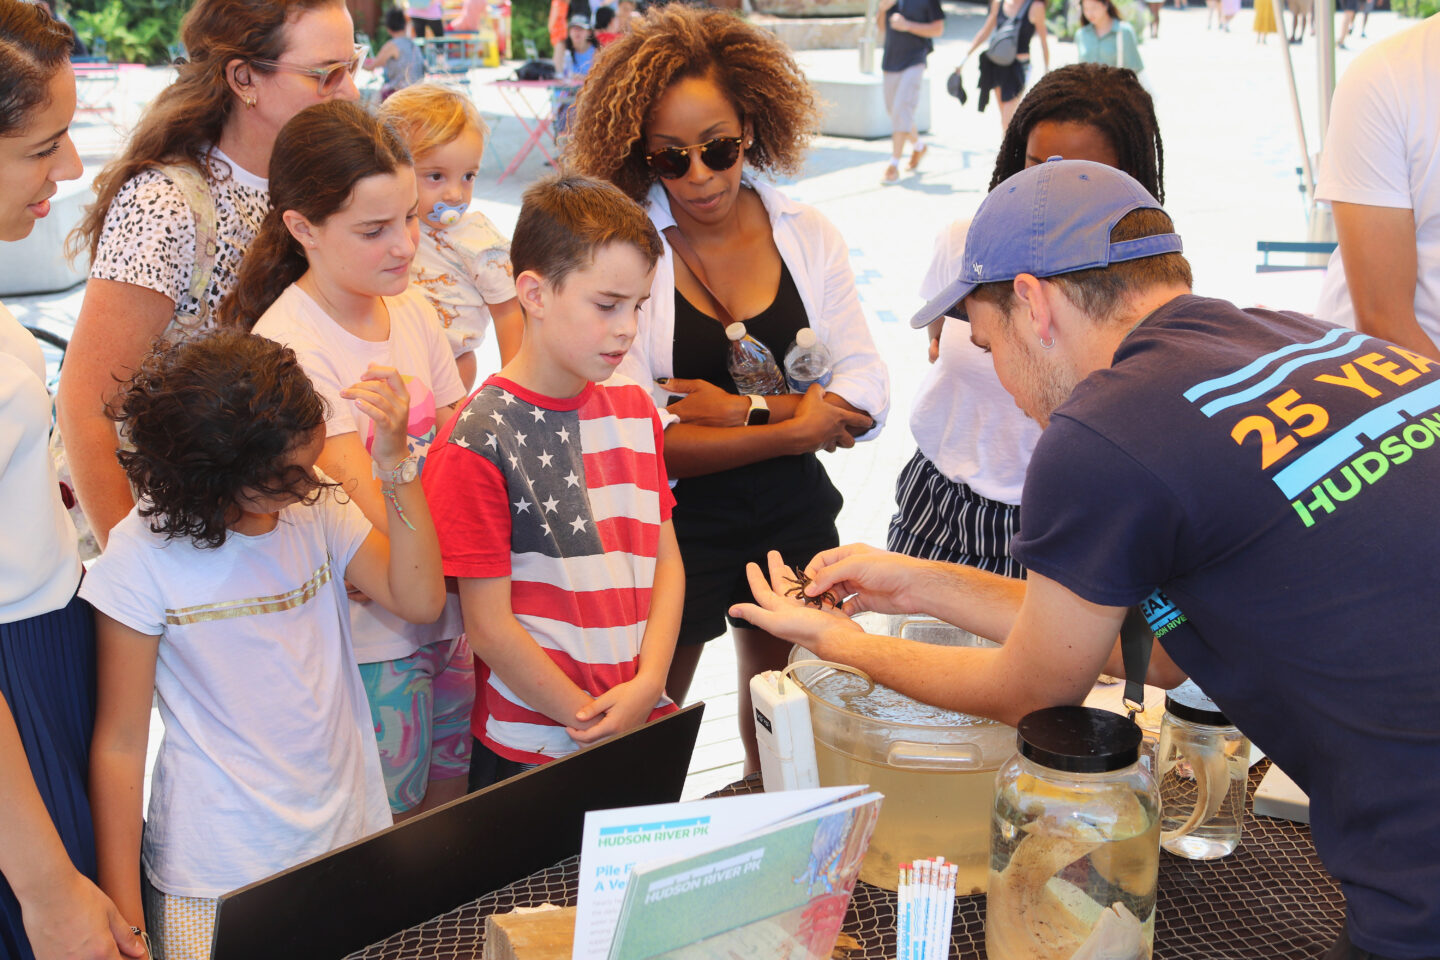 An HRPK River Project staffer shows kids and adults a small crab that lives in the Hudson River